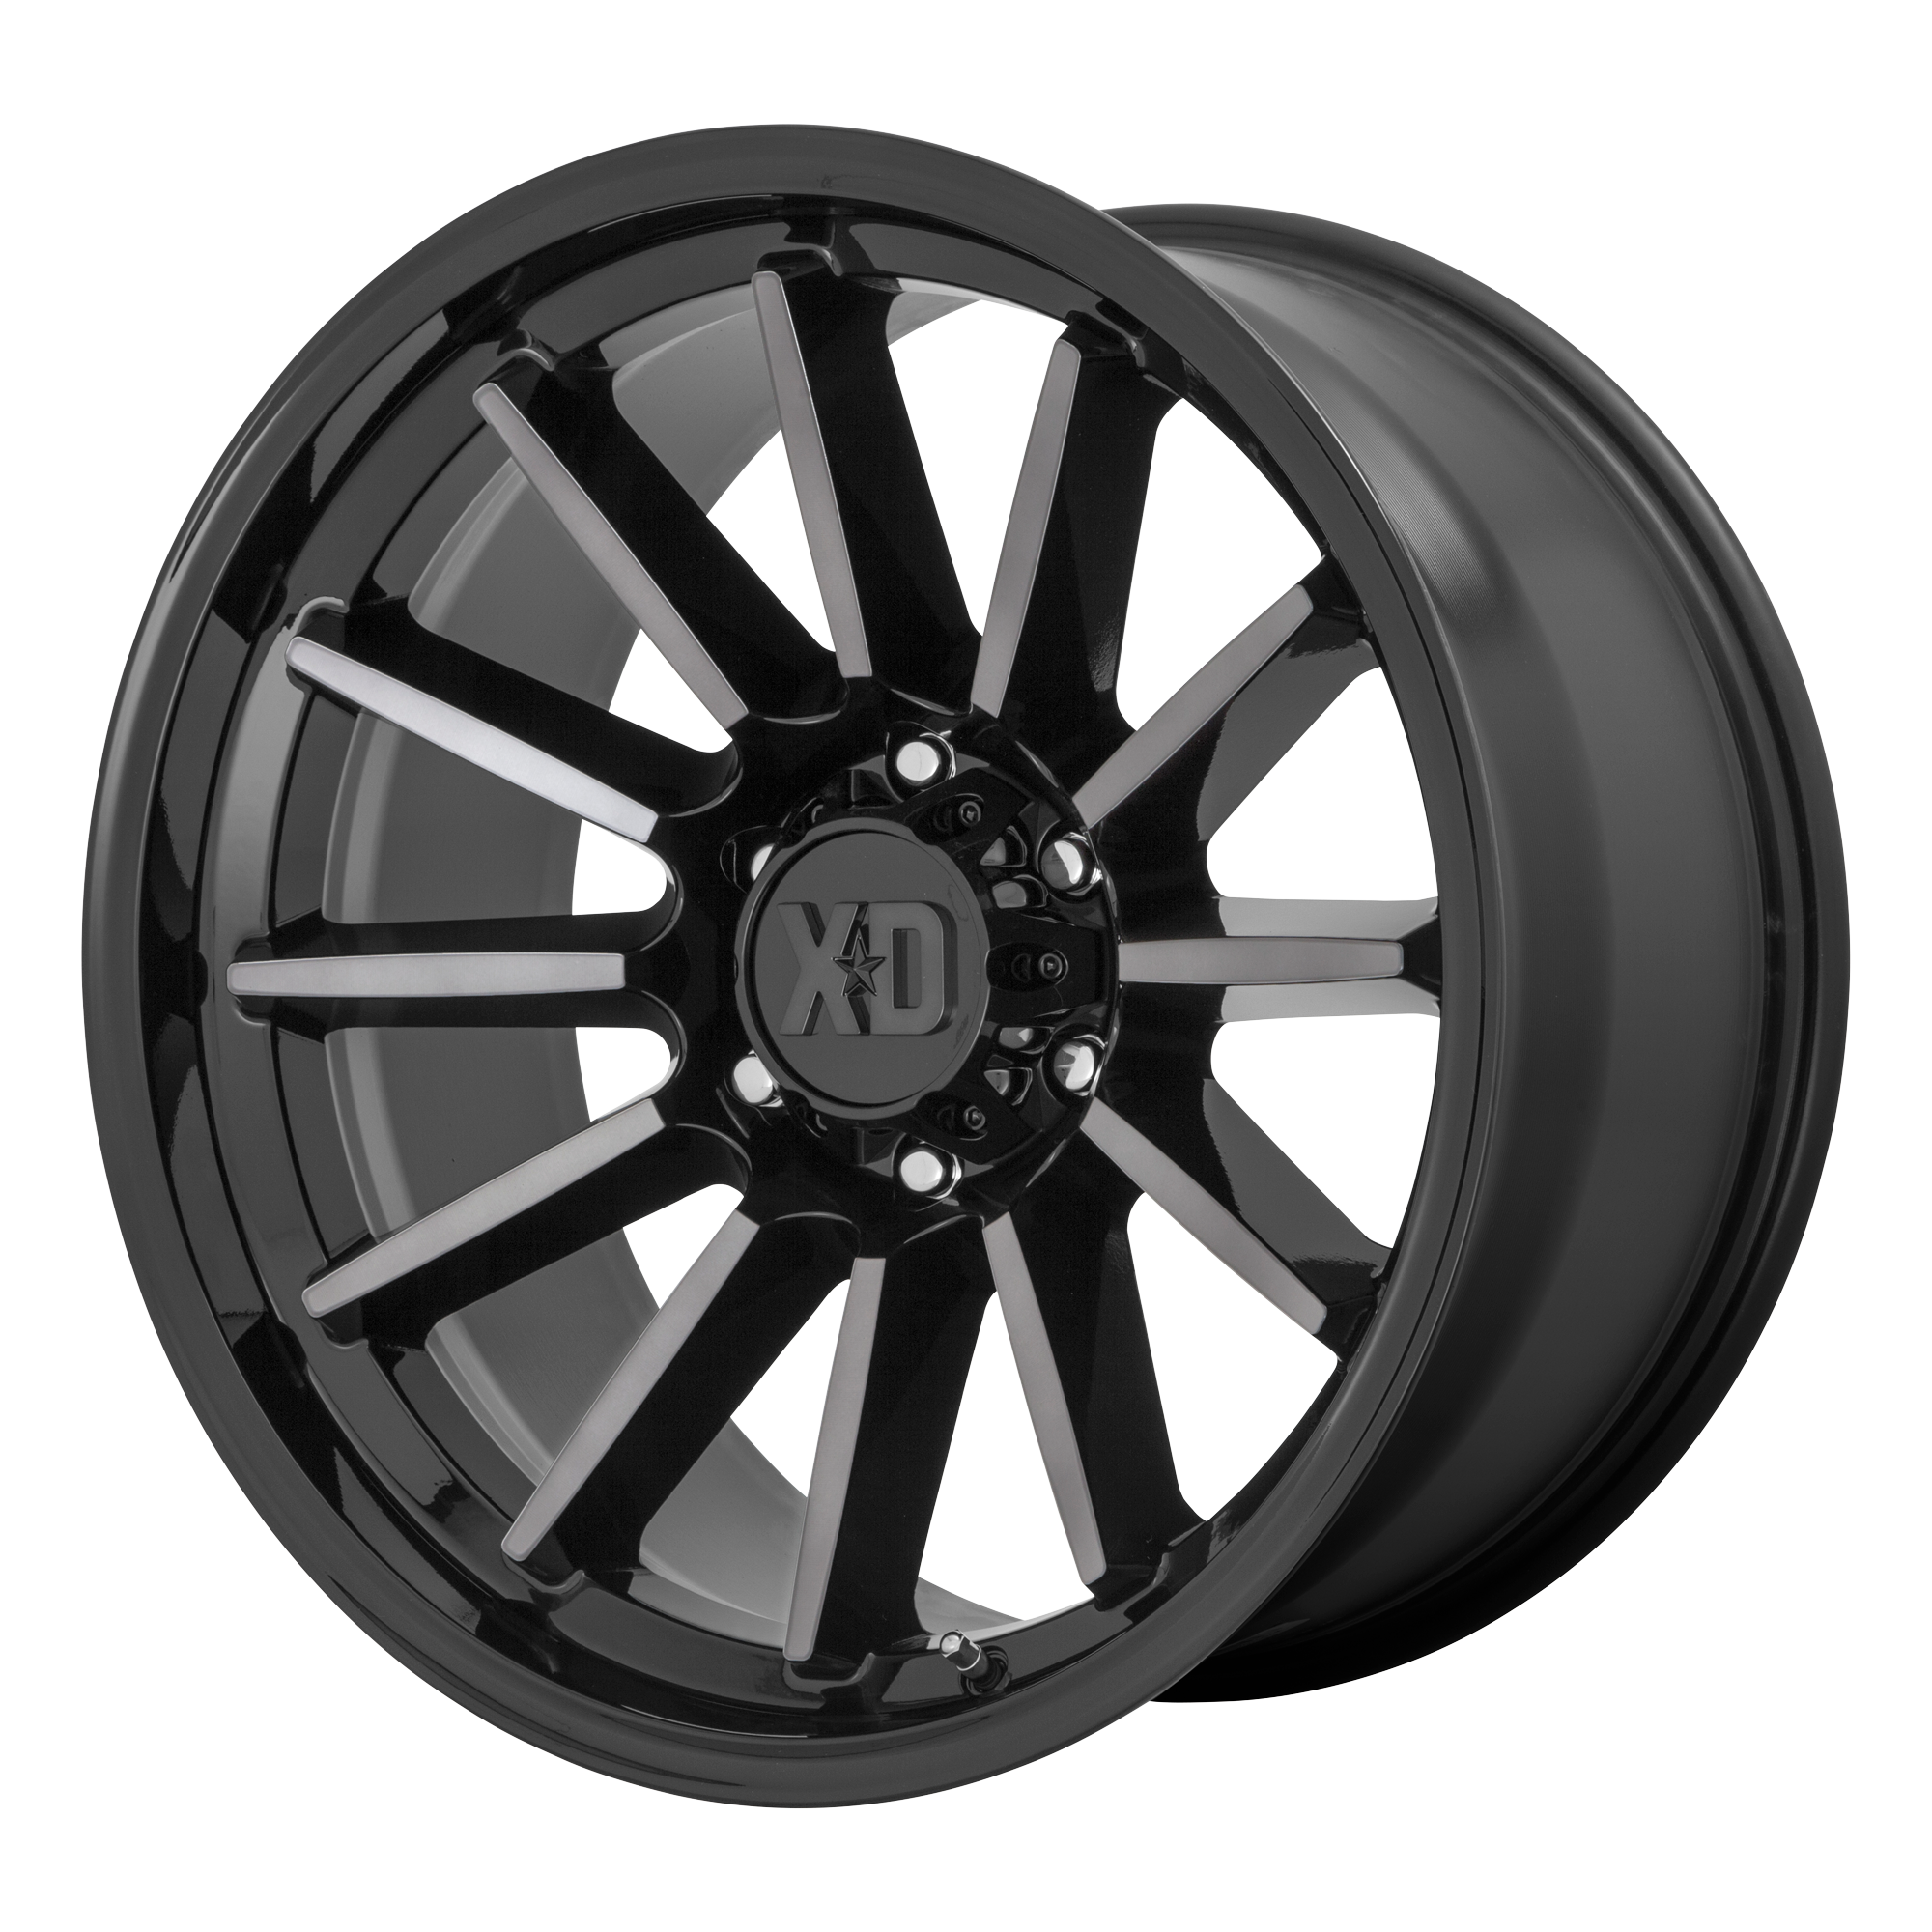 XD855 20x10 6x135.00 GLOSS BLACK MACHINED W/ GRAY TINT (-18 mm) - Tires and Engine Performance